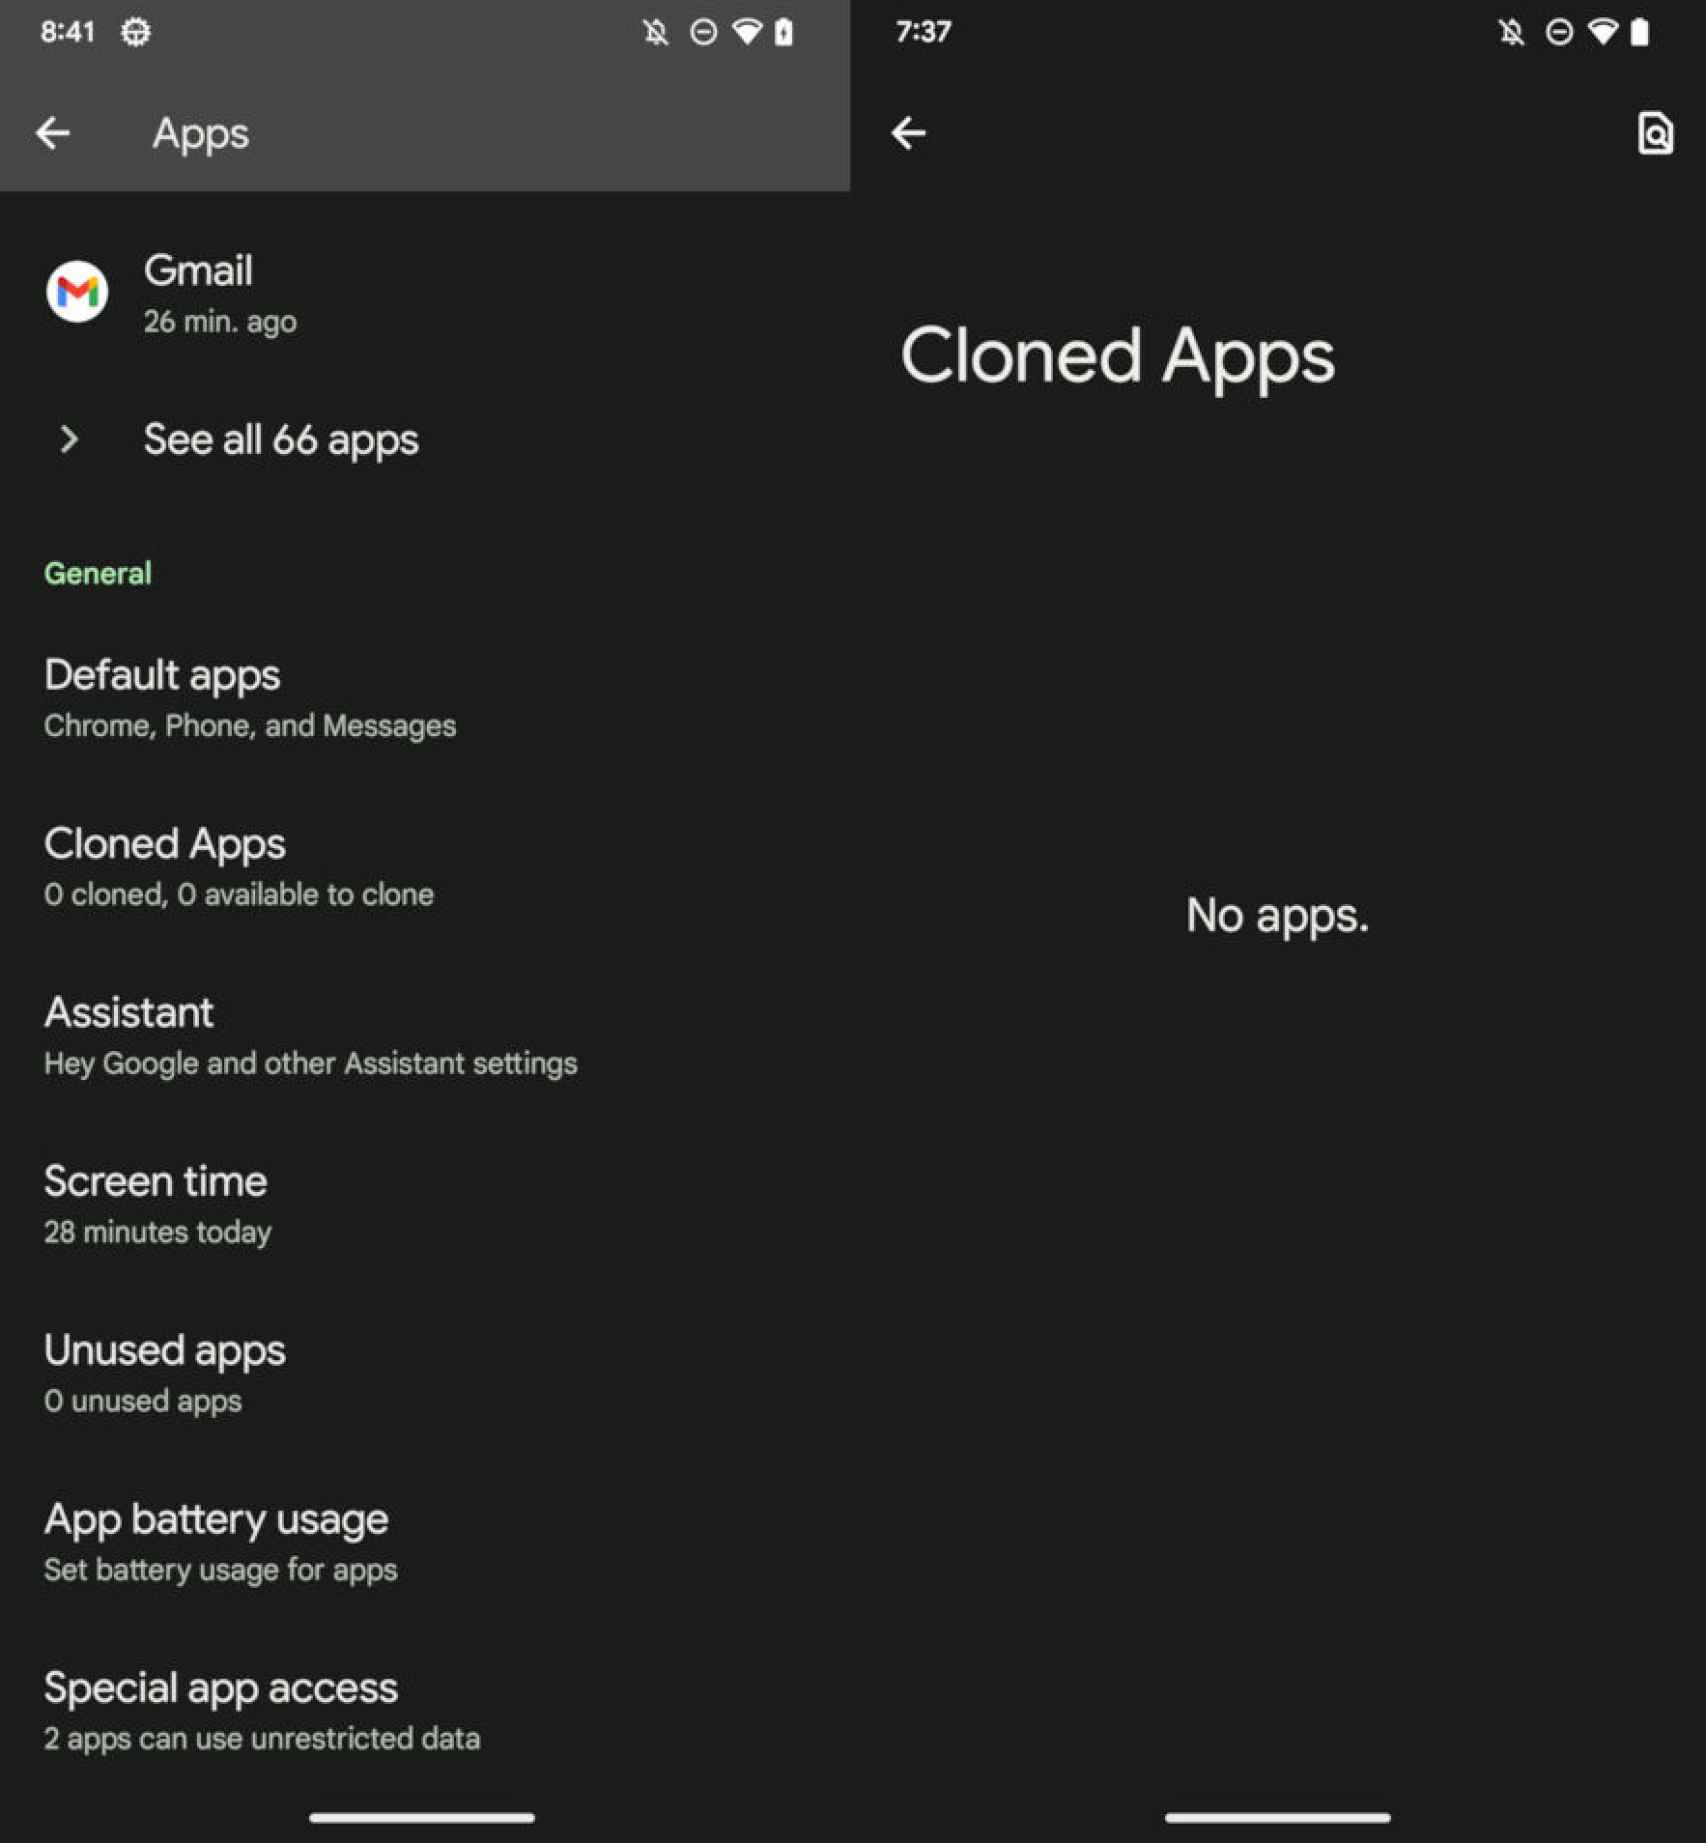 New function to clone apps in Android 14